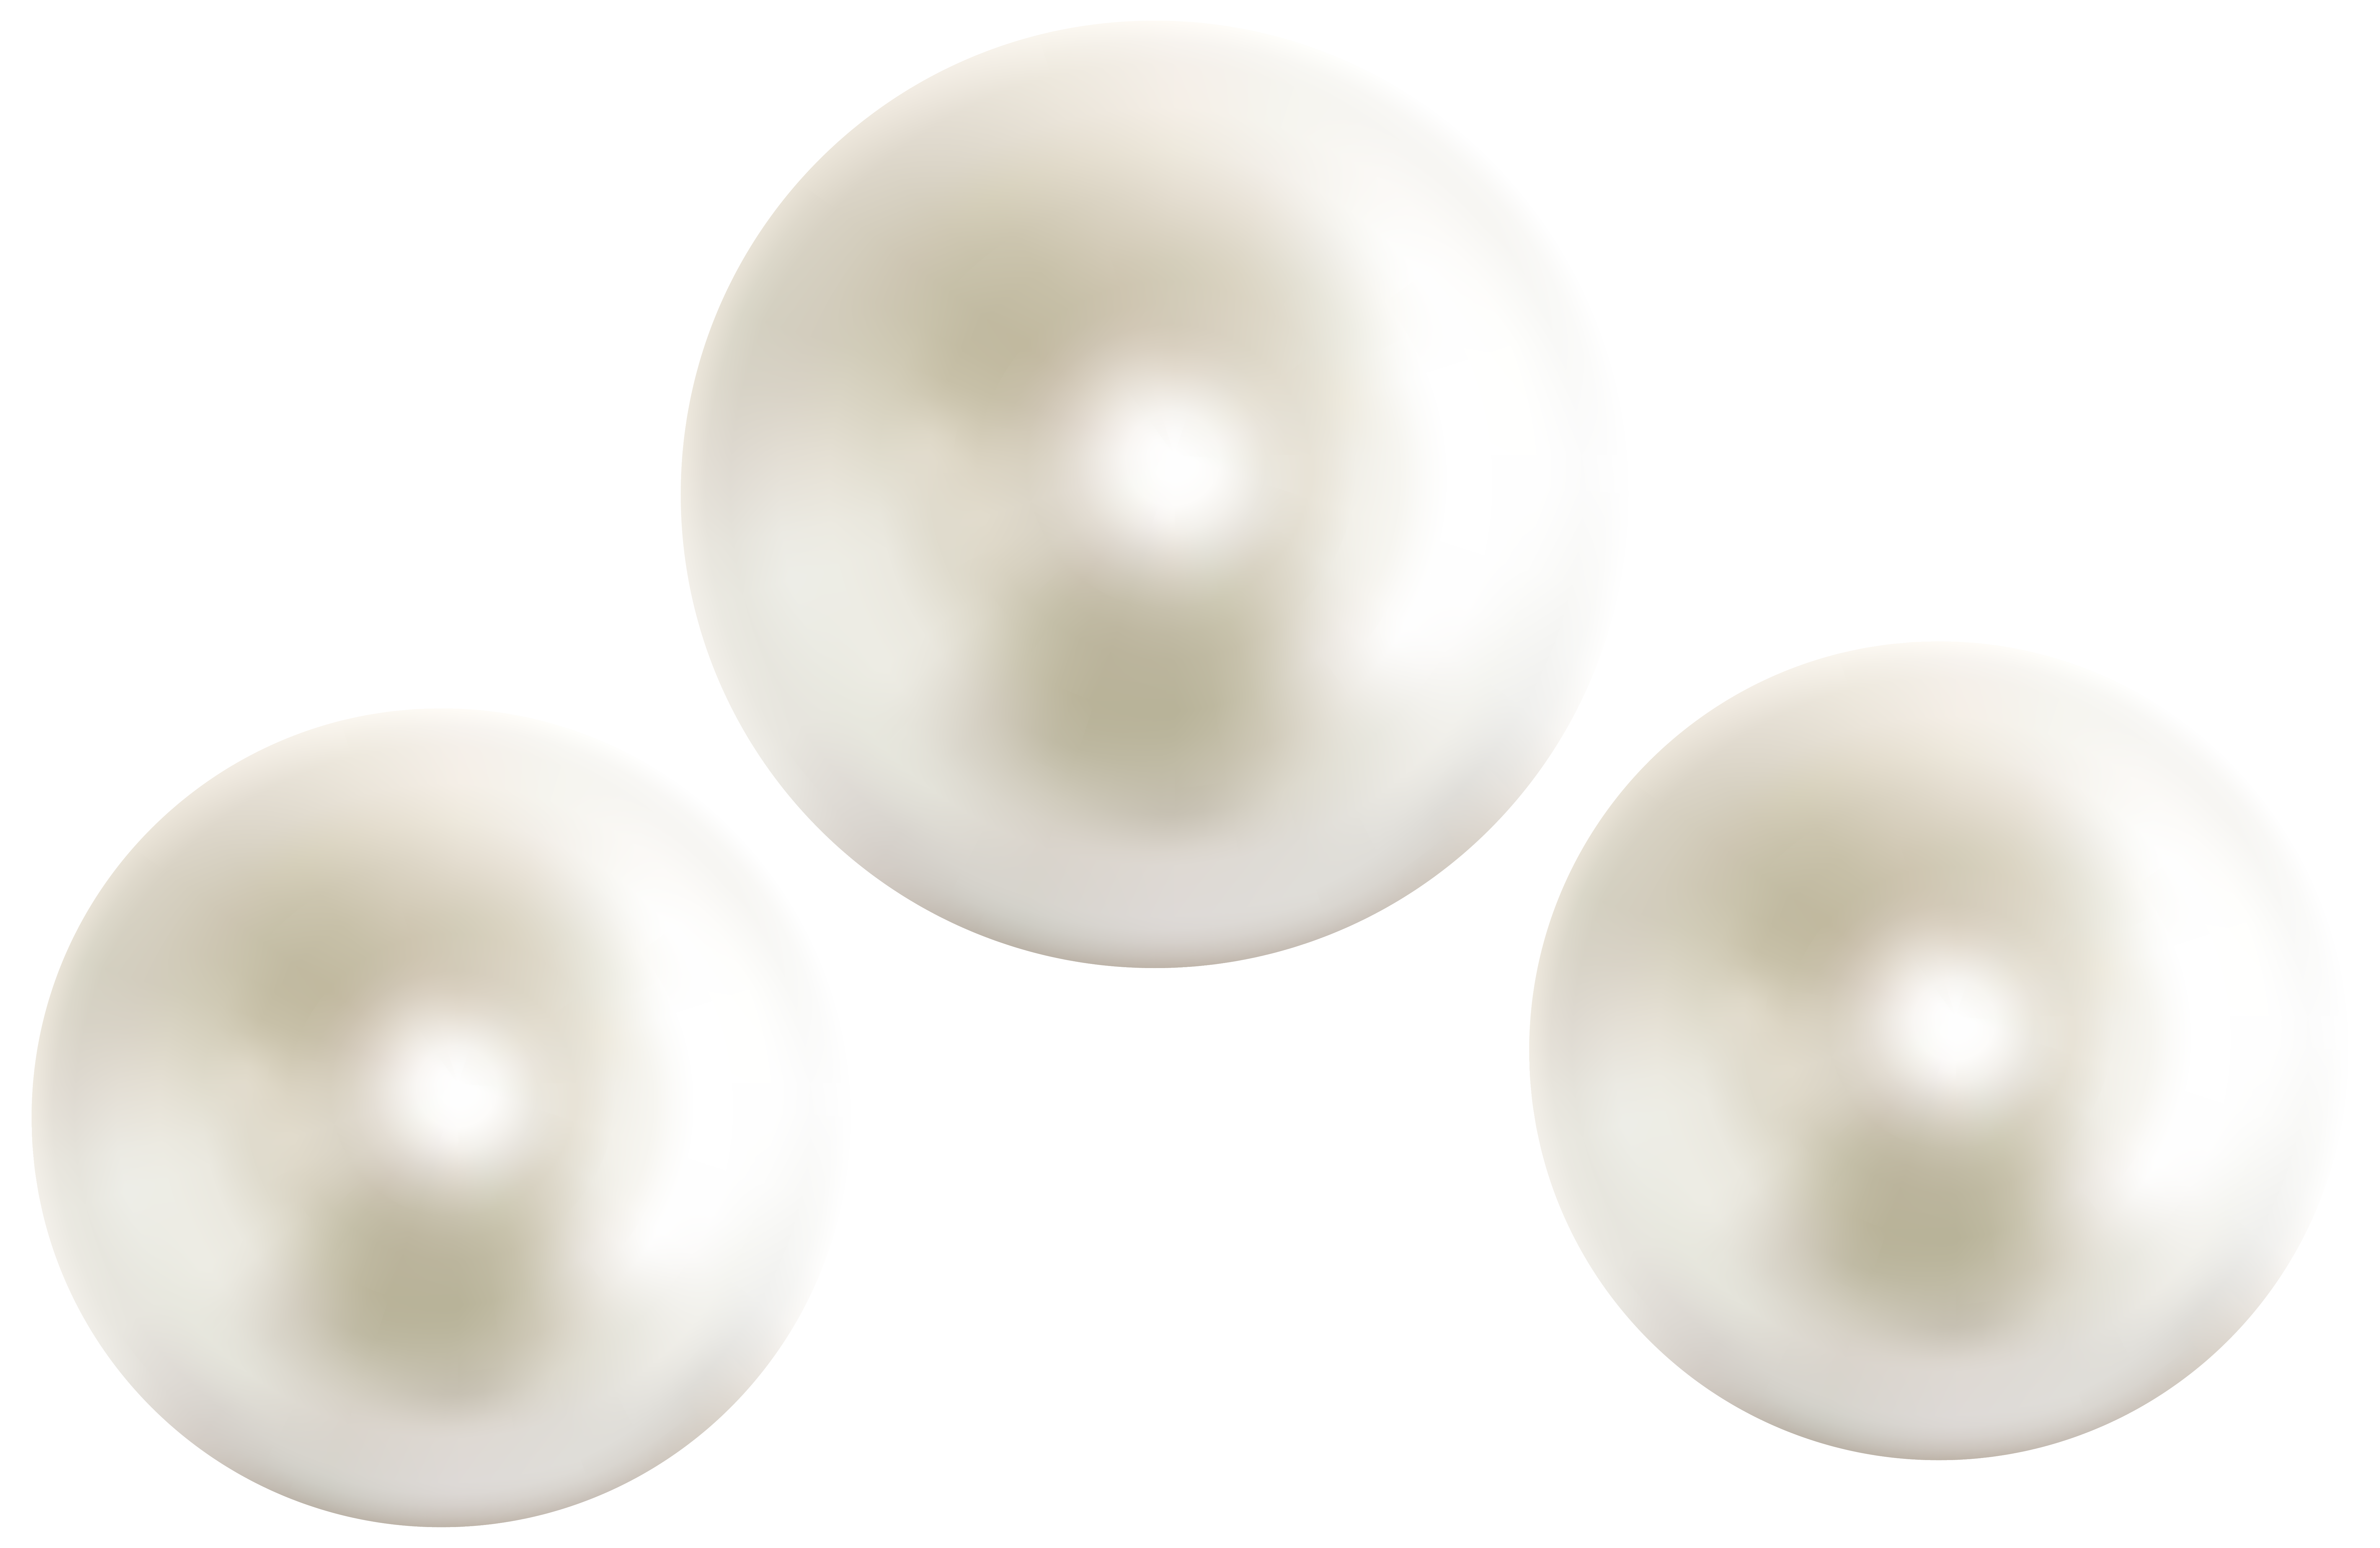 Pearls clipart pearl earring. Material body piercing jewellery